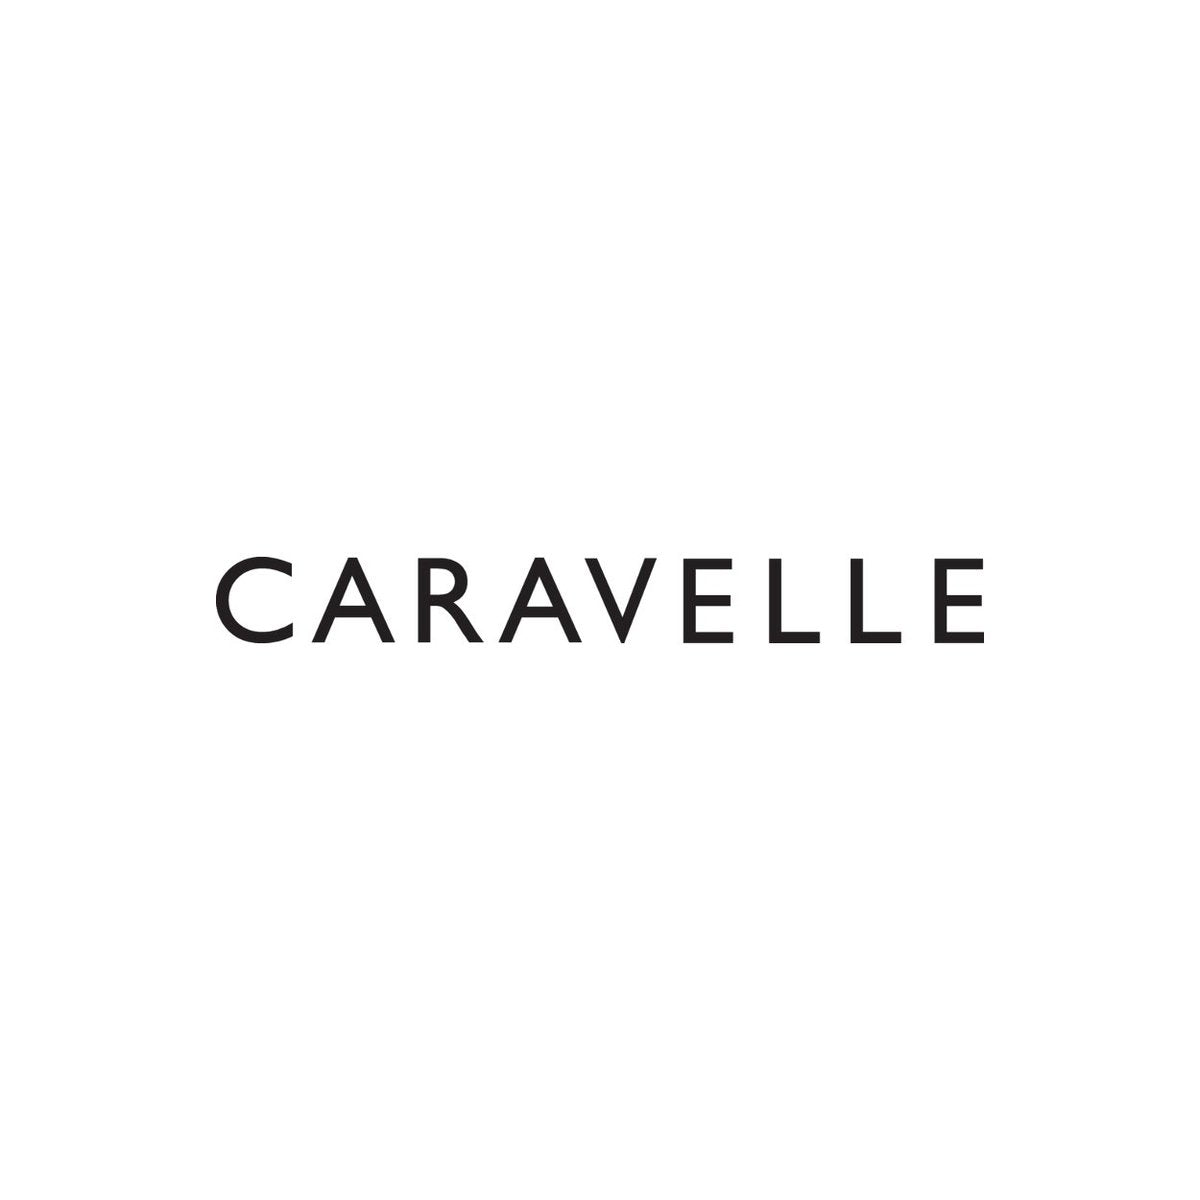 Caravelle Watches